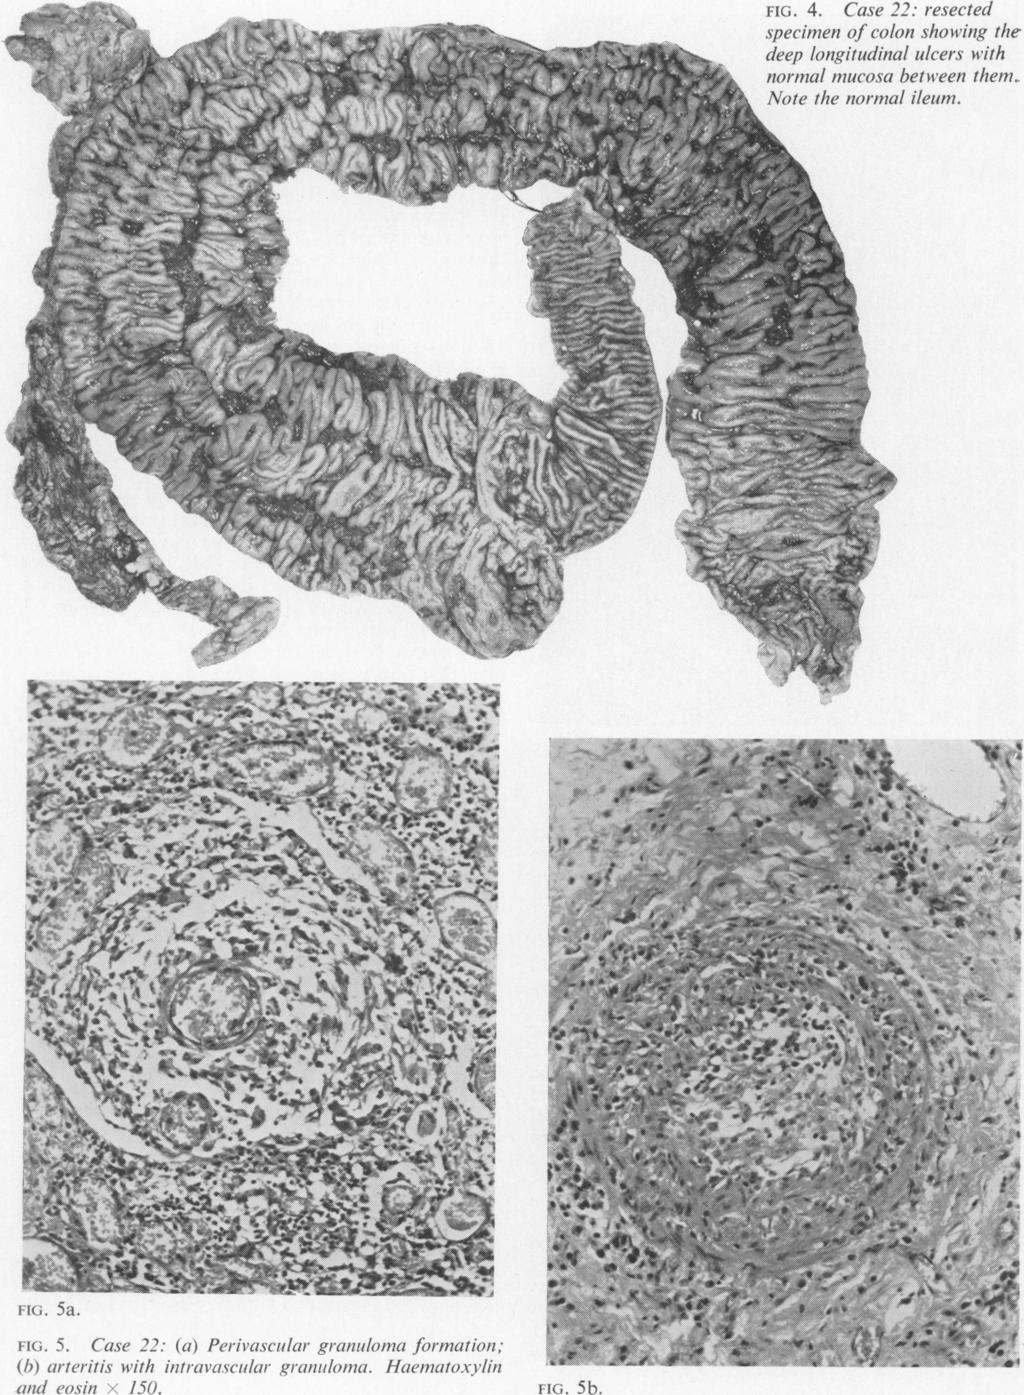 168 V. J. McGovern and S. J. M. Goulston FIG. 4. Case 22: resected specimen of colon showinig the deep longitudinal ulcers with normal mucosa between them. Note the normal ileum.